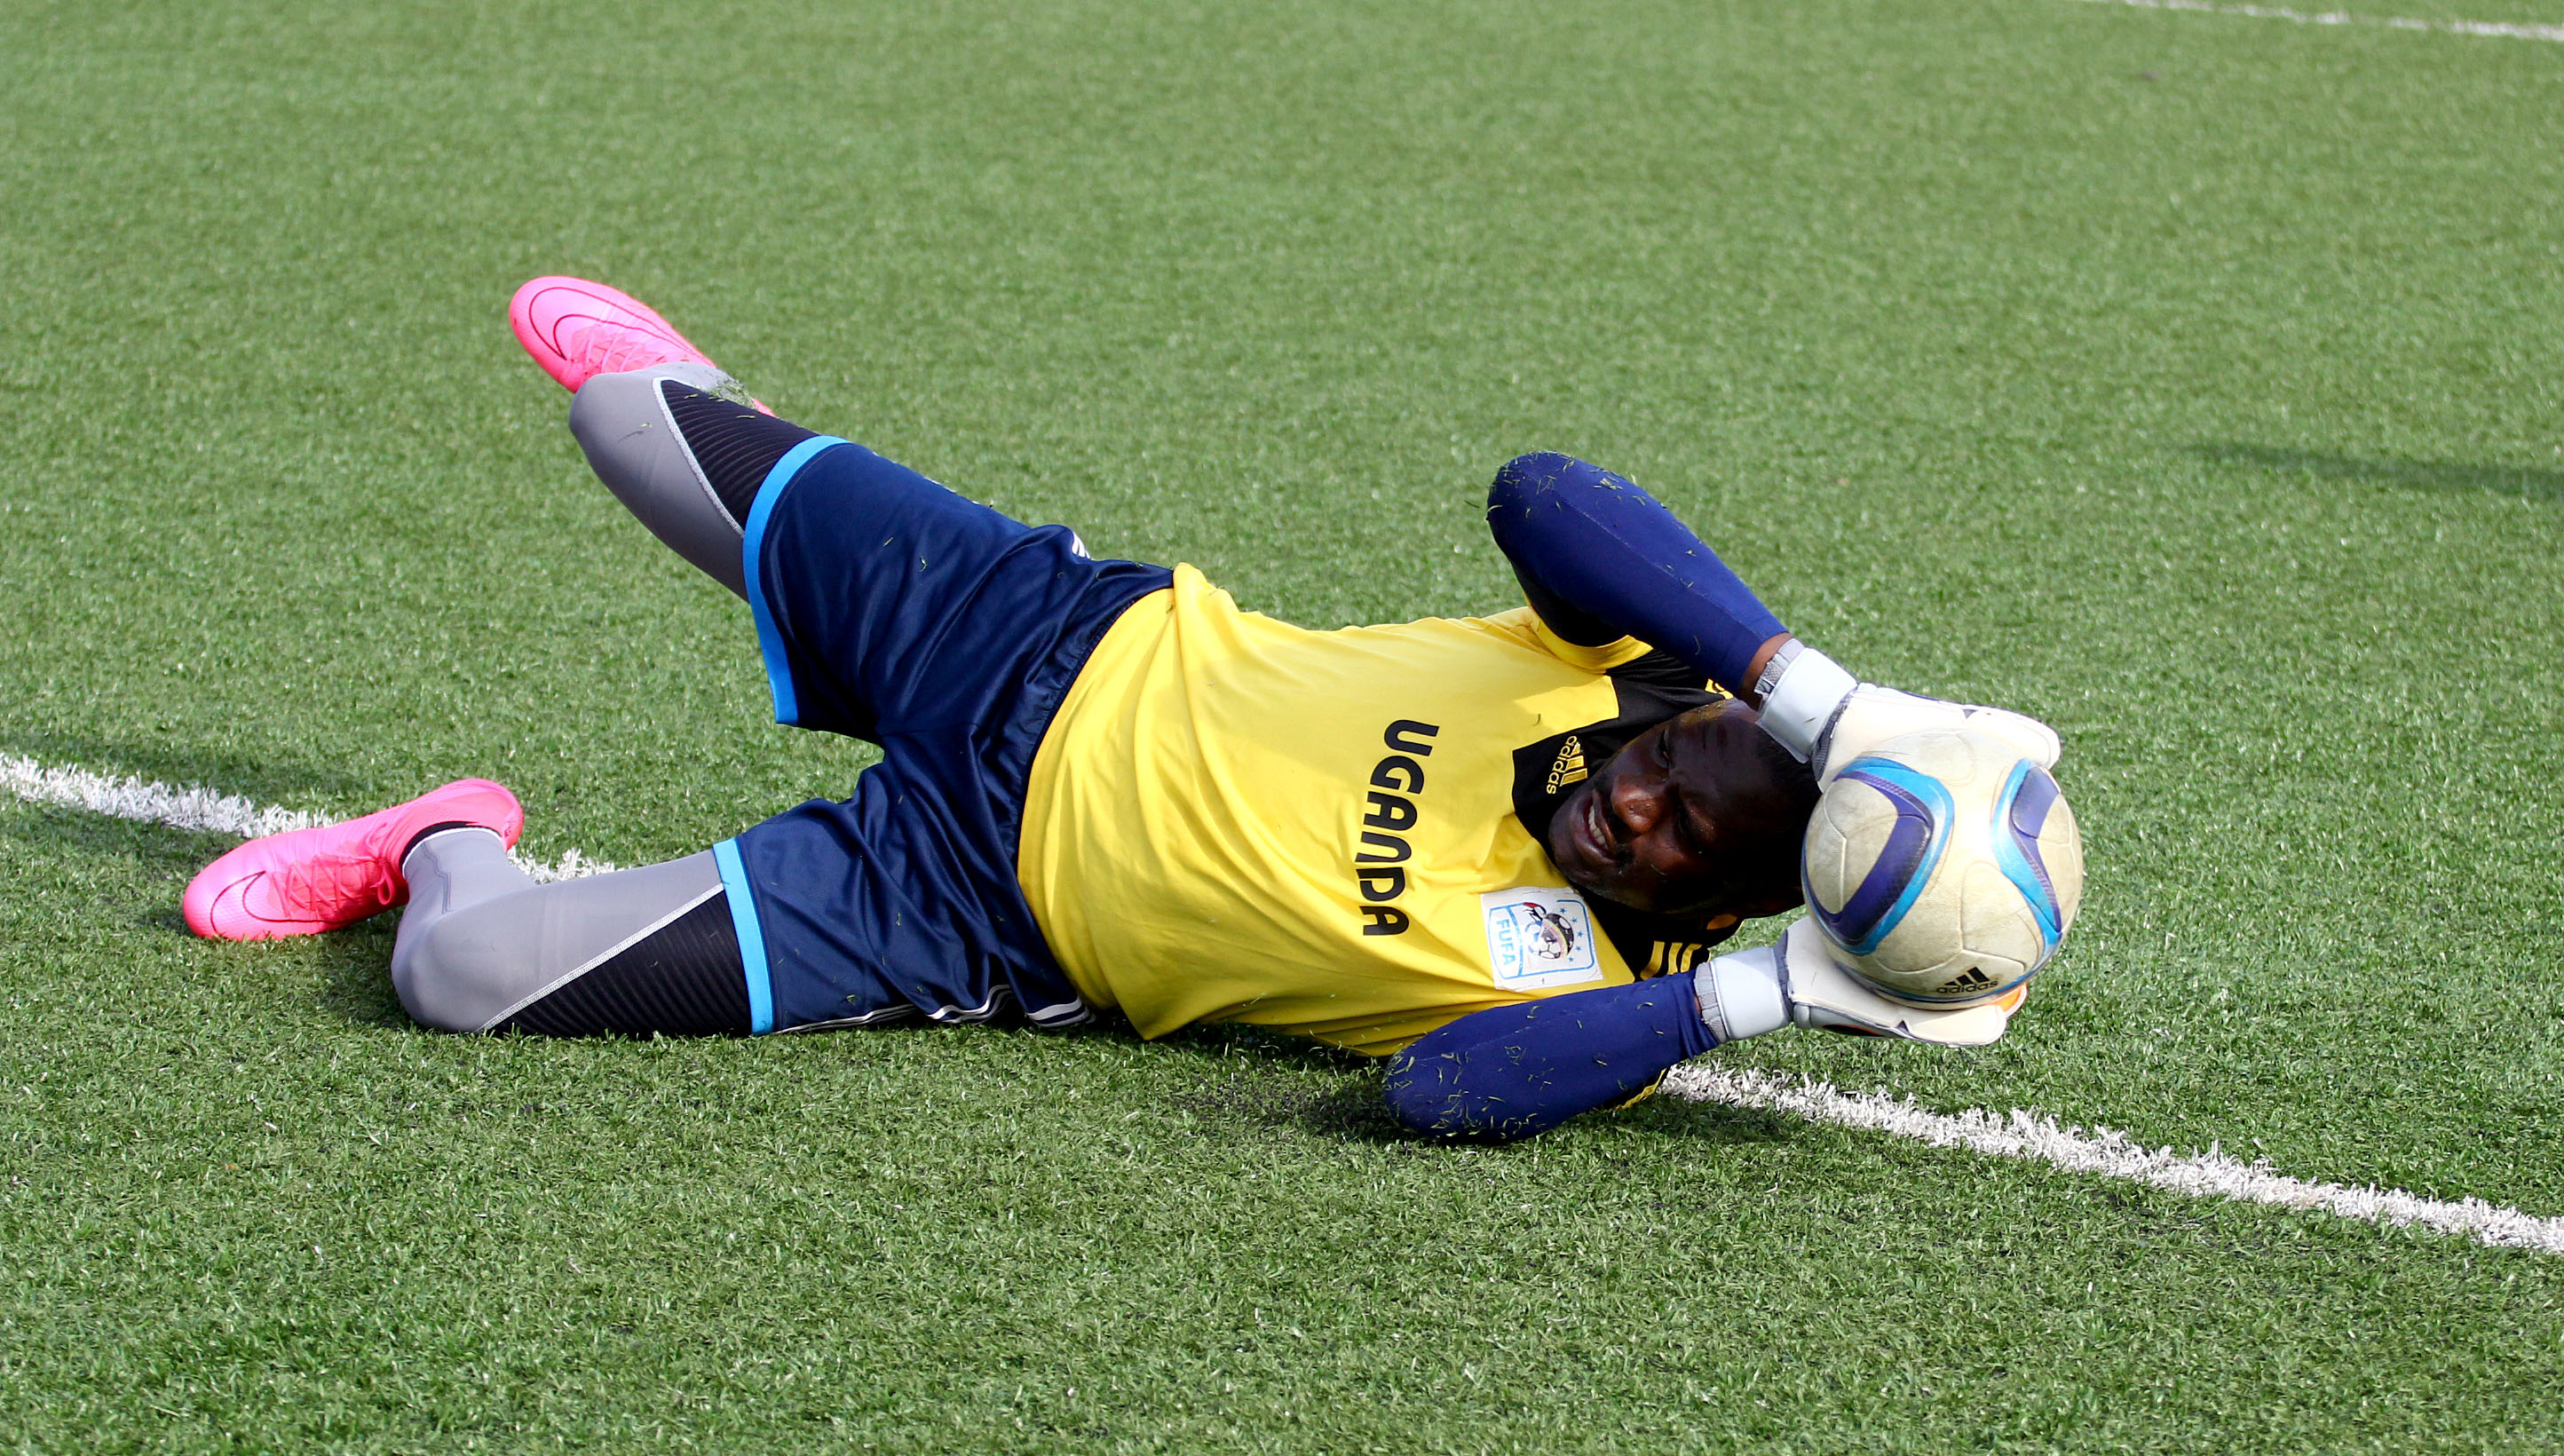 Ug Cranes Goalkeeper Ranked No.10 In The World - Spur Magazine